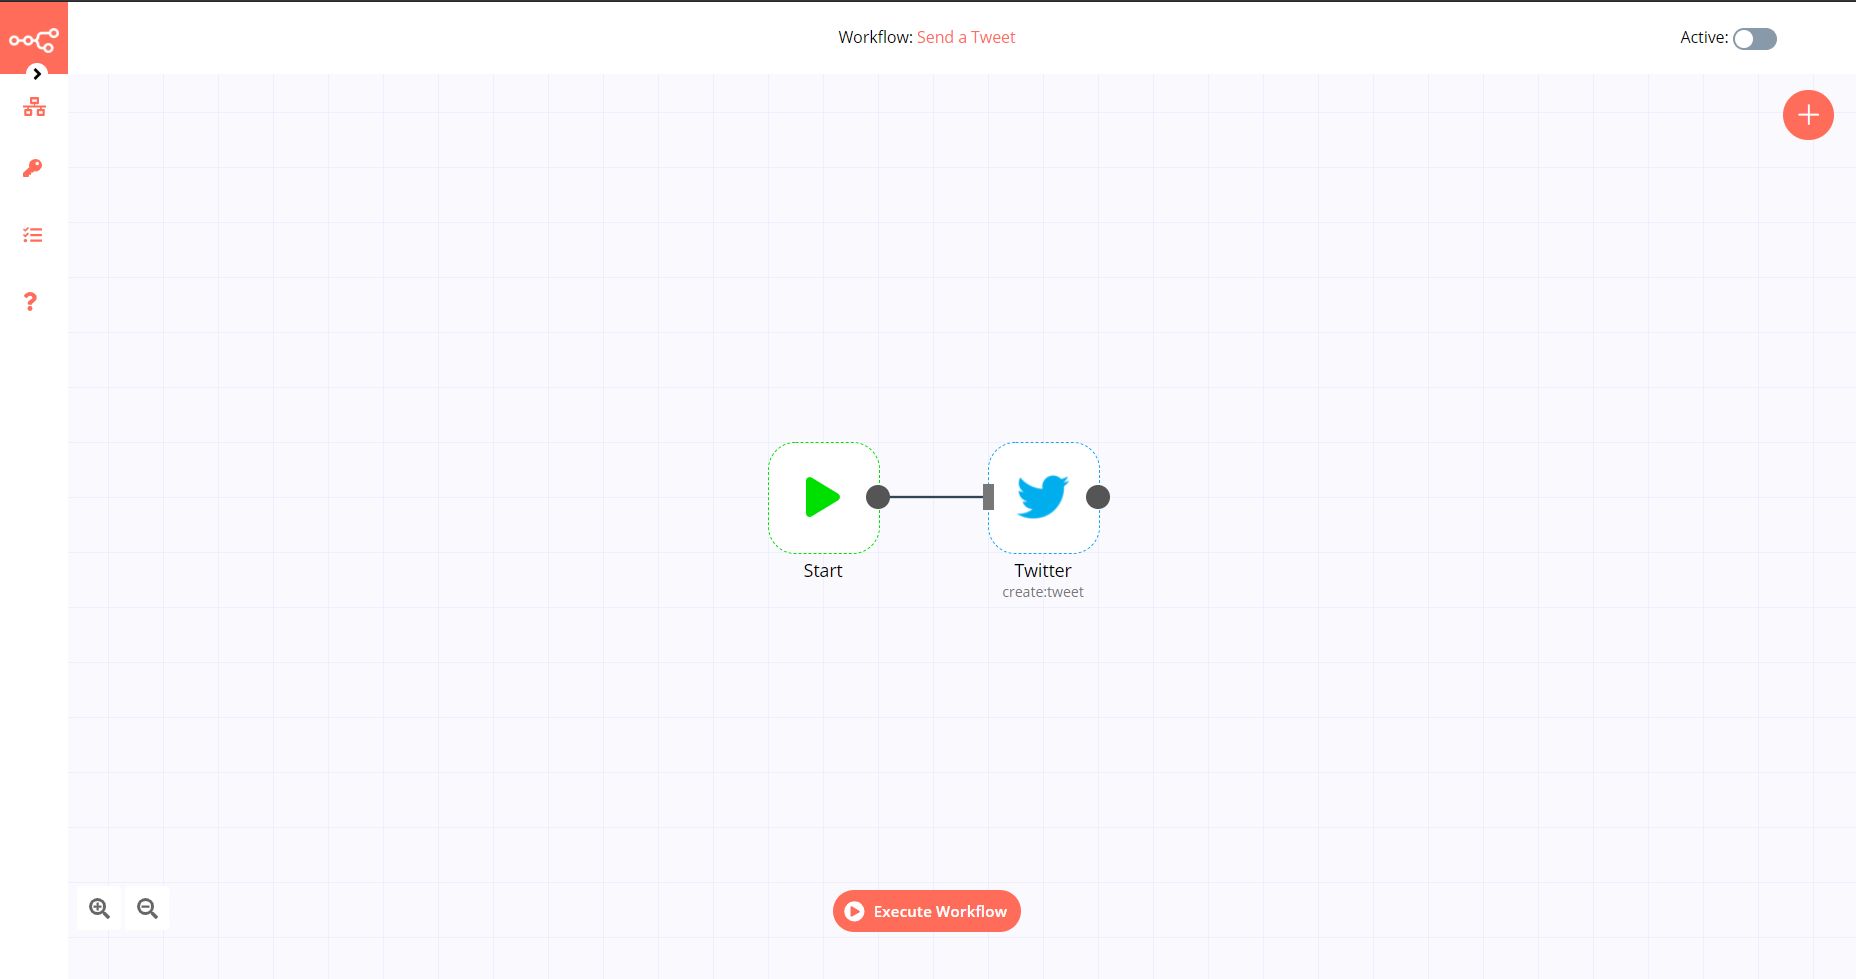 A workflow with the Twitter node